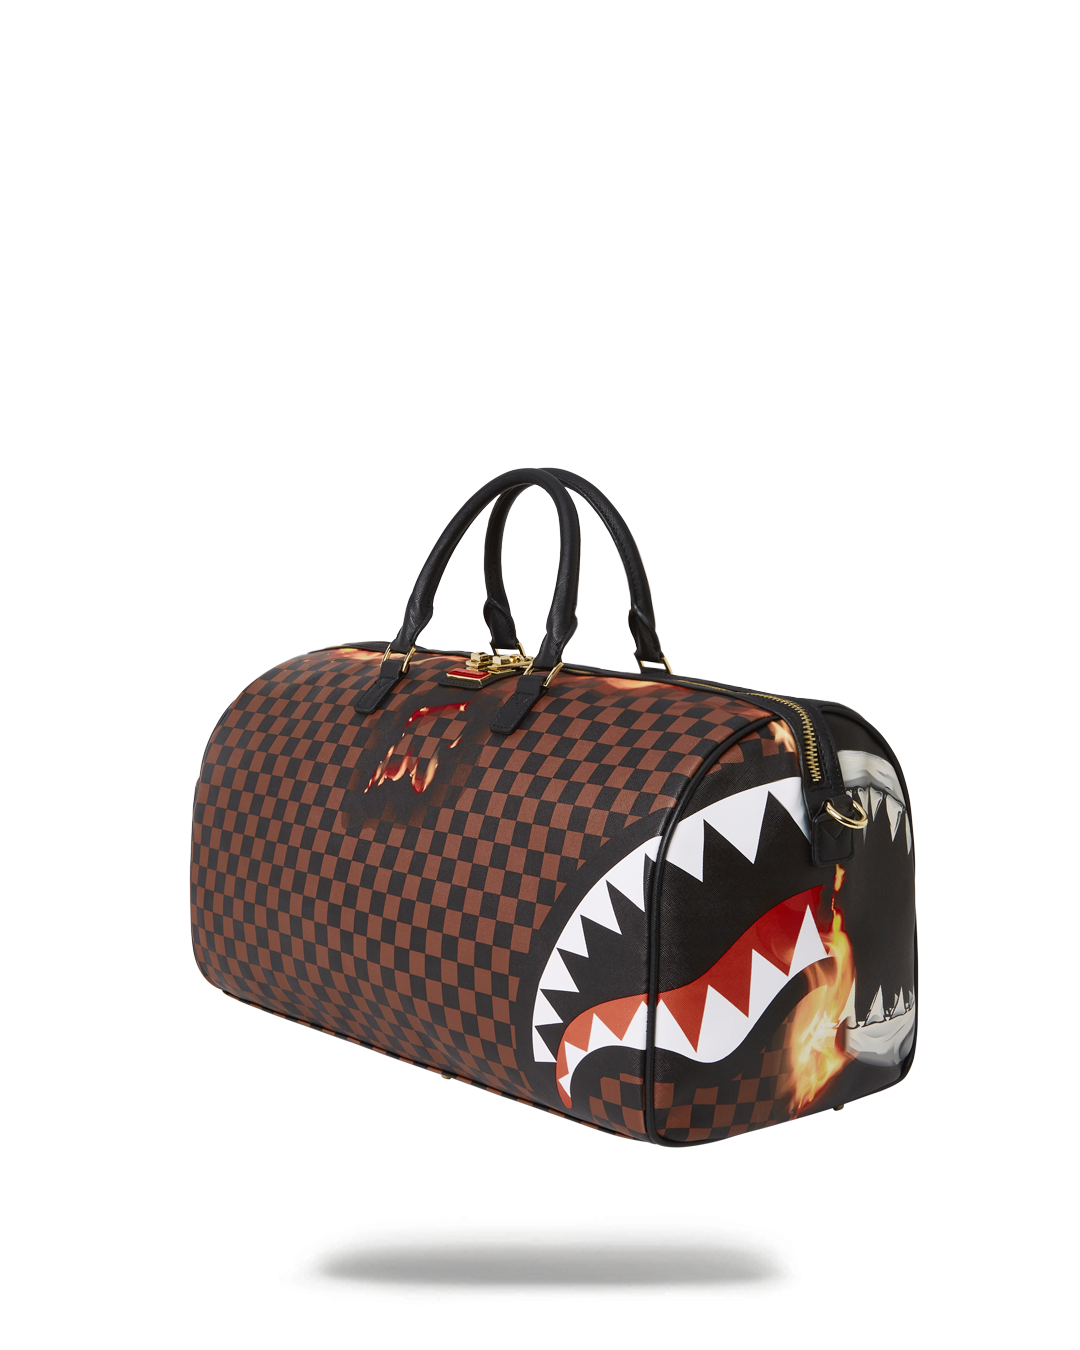 SHARKS IN PARIS UNSTOPPABLE DUFFLE